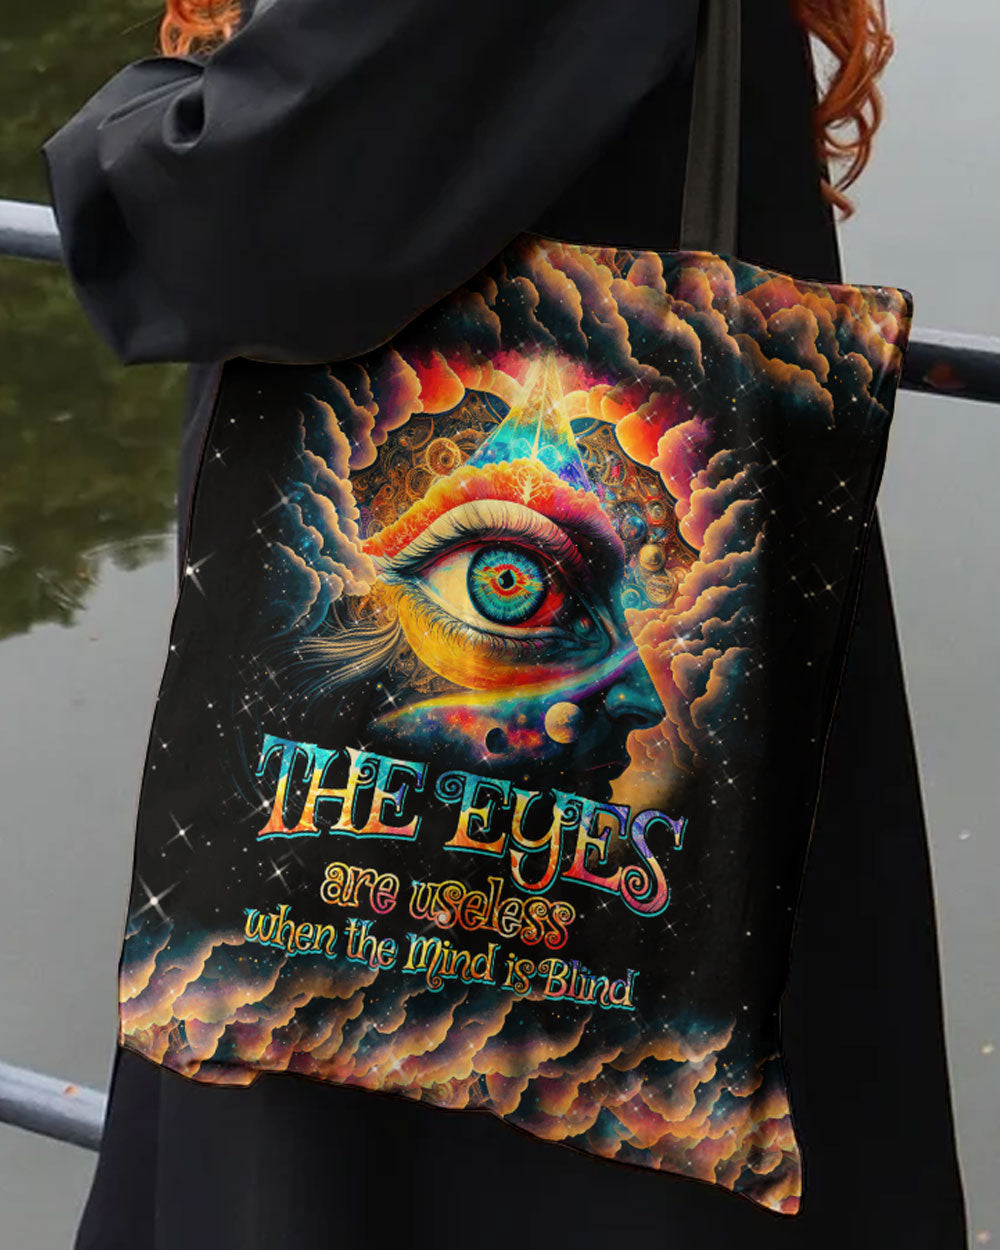 THE EYES ARE USELESS WHEN THE MIND IS BLIND TOTE BAG - TYTM2203231